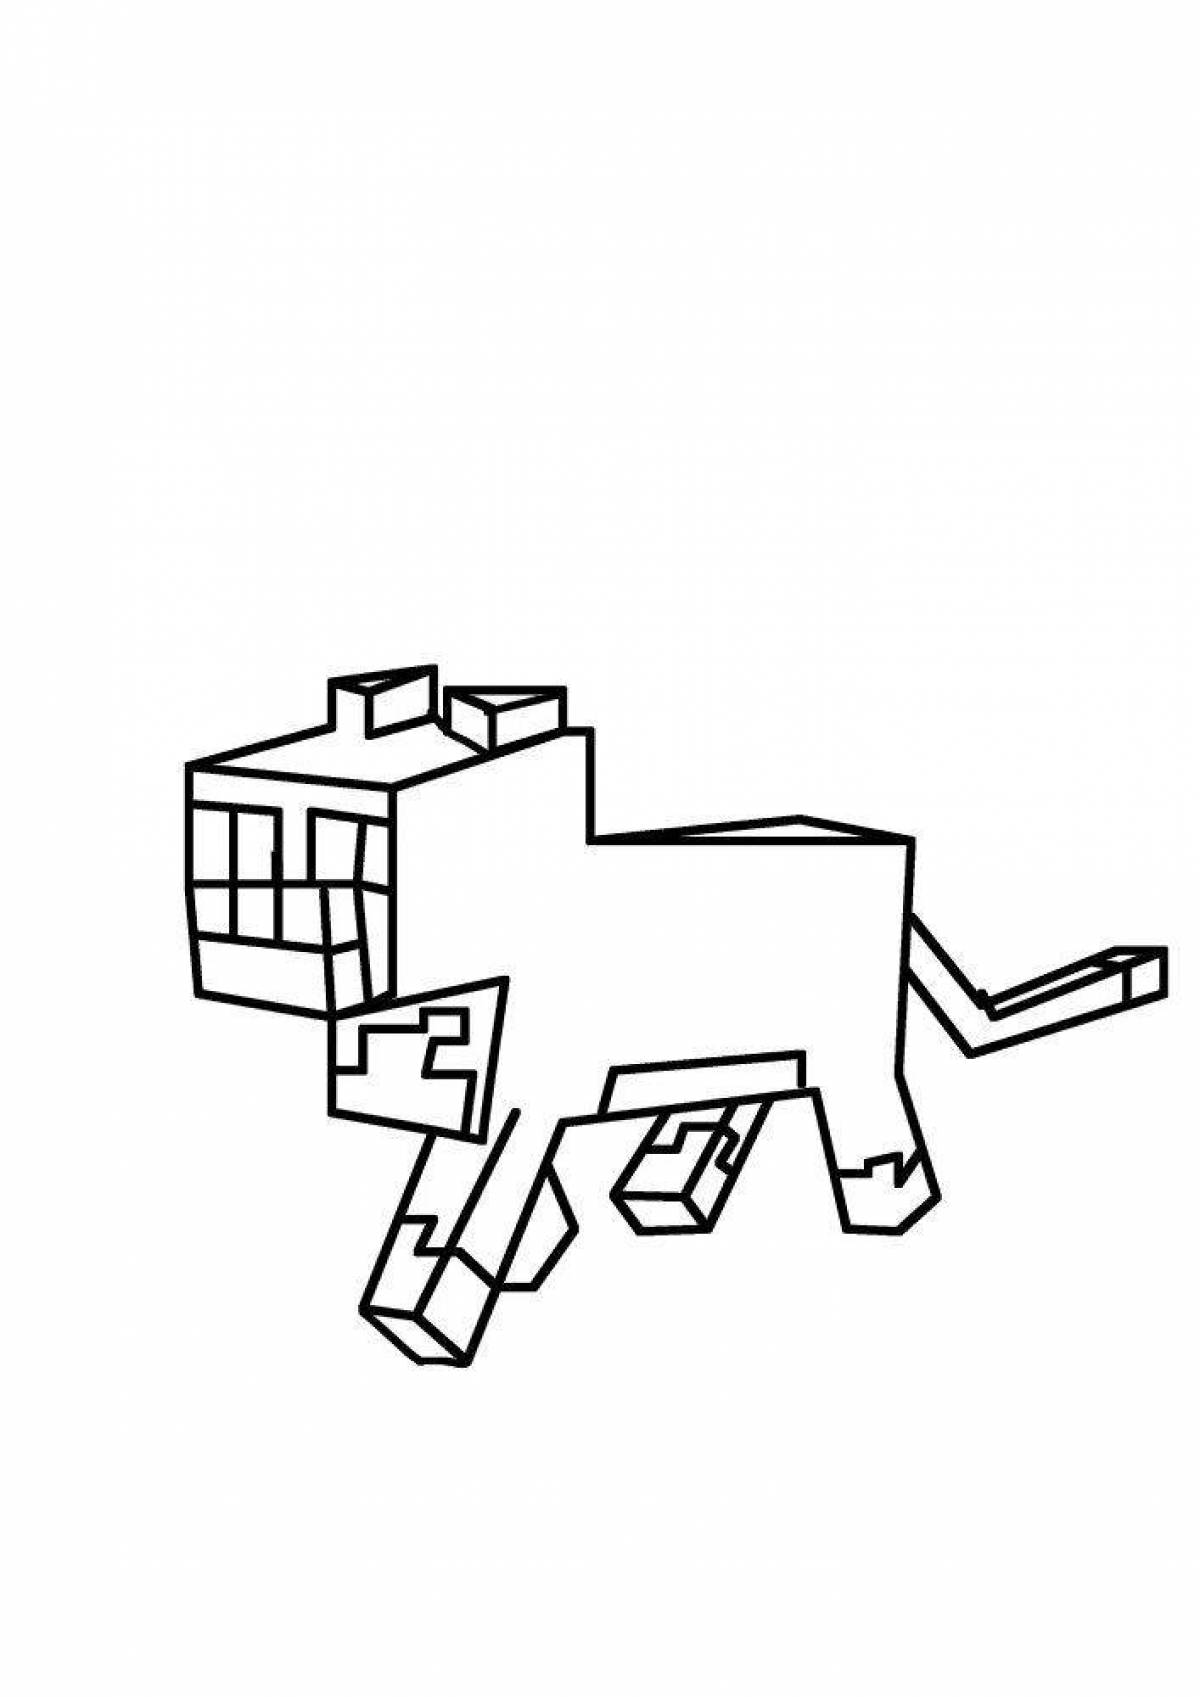 Playful minecraft ocelot coloring page